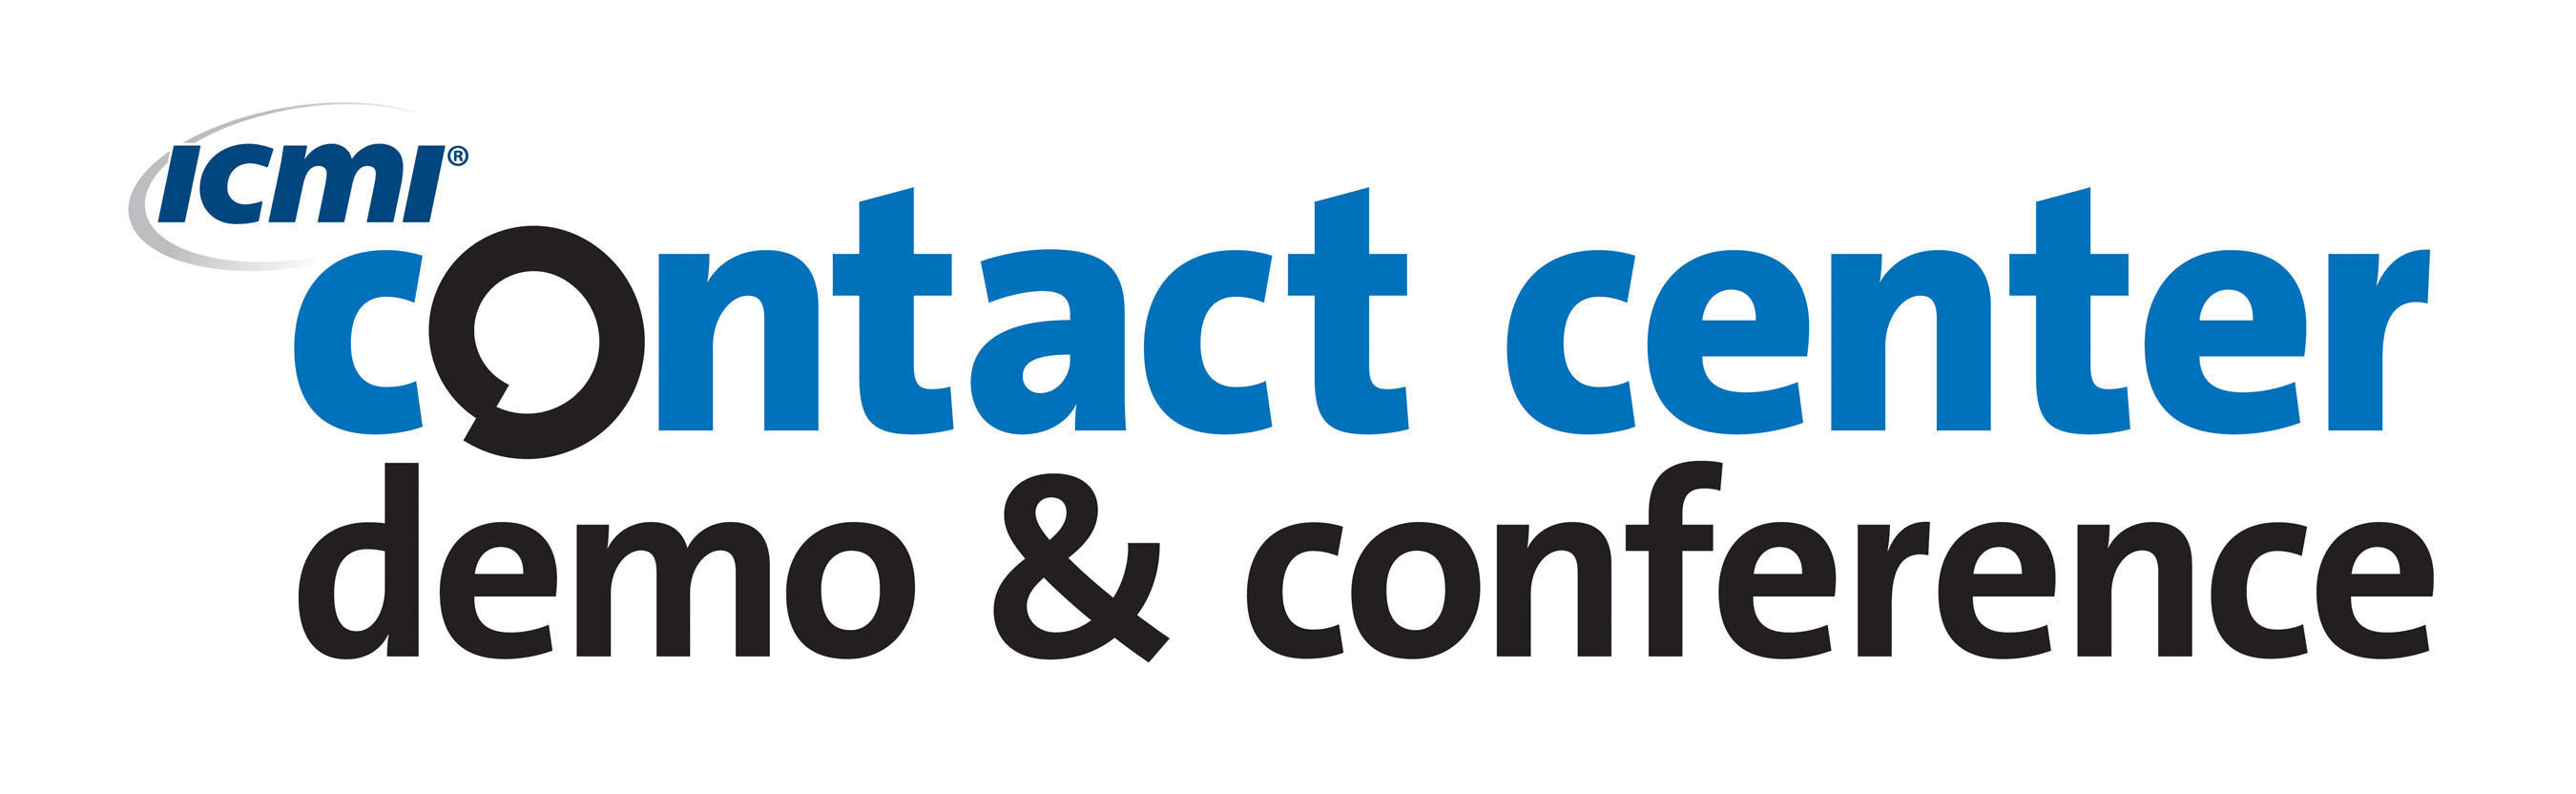 ICMI Contact Center Demo & Conference Announces Eight Interactive Workshops for 2016 Event